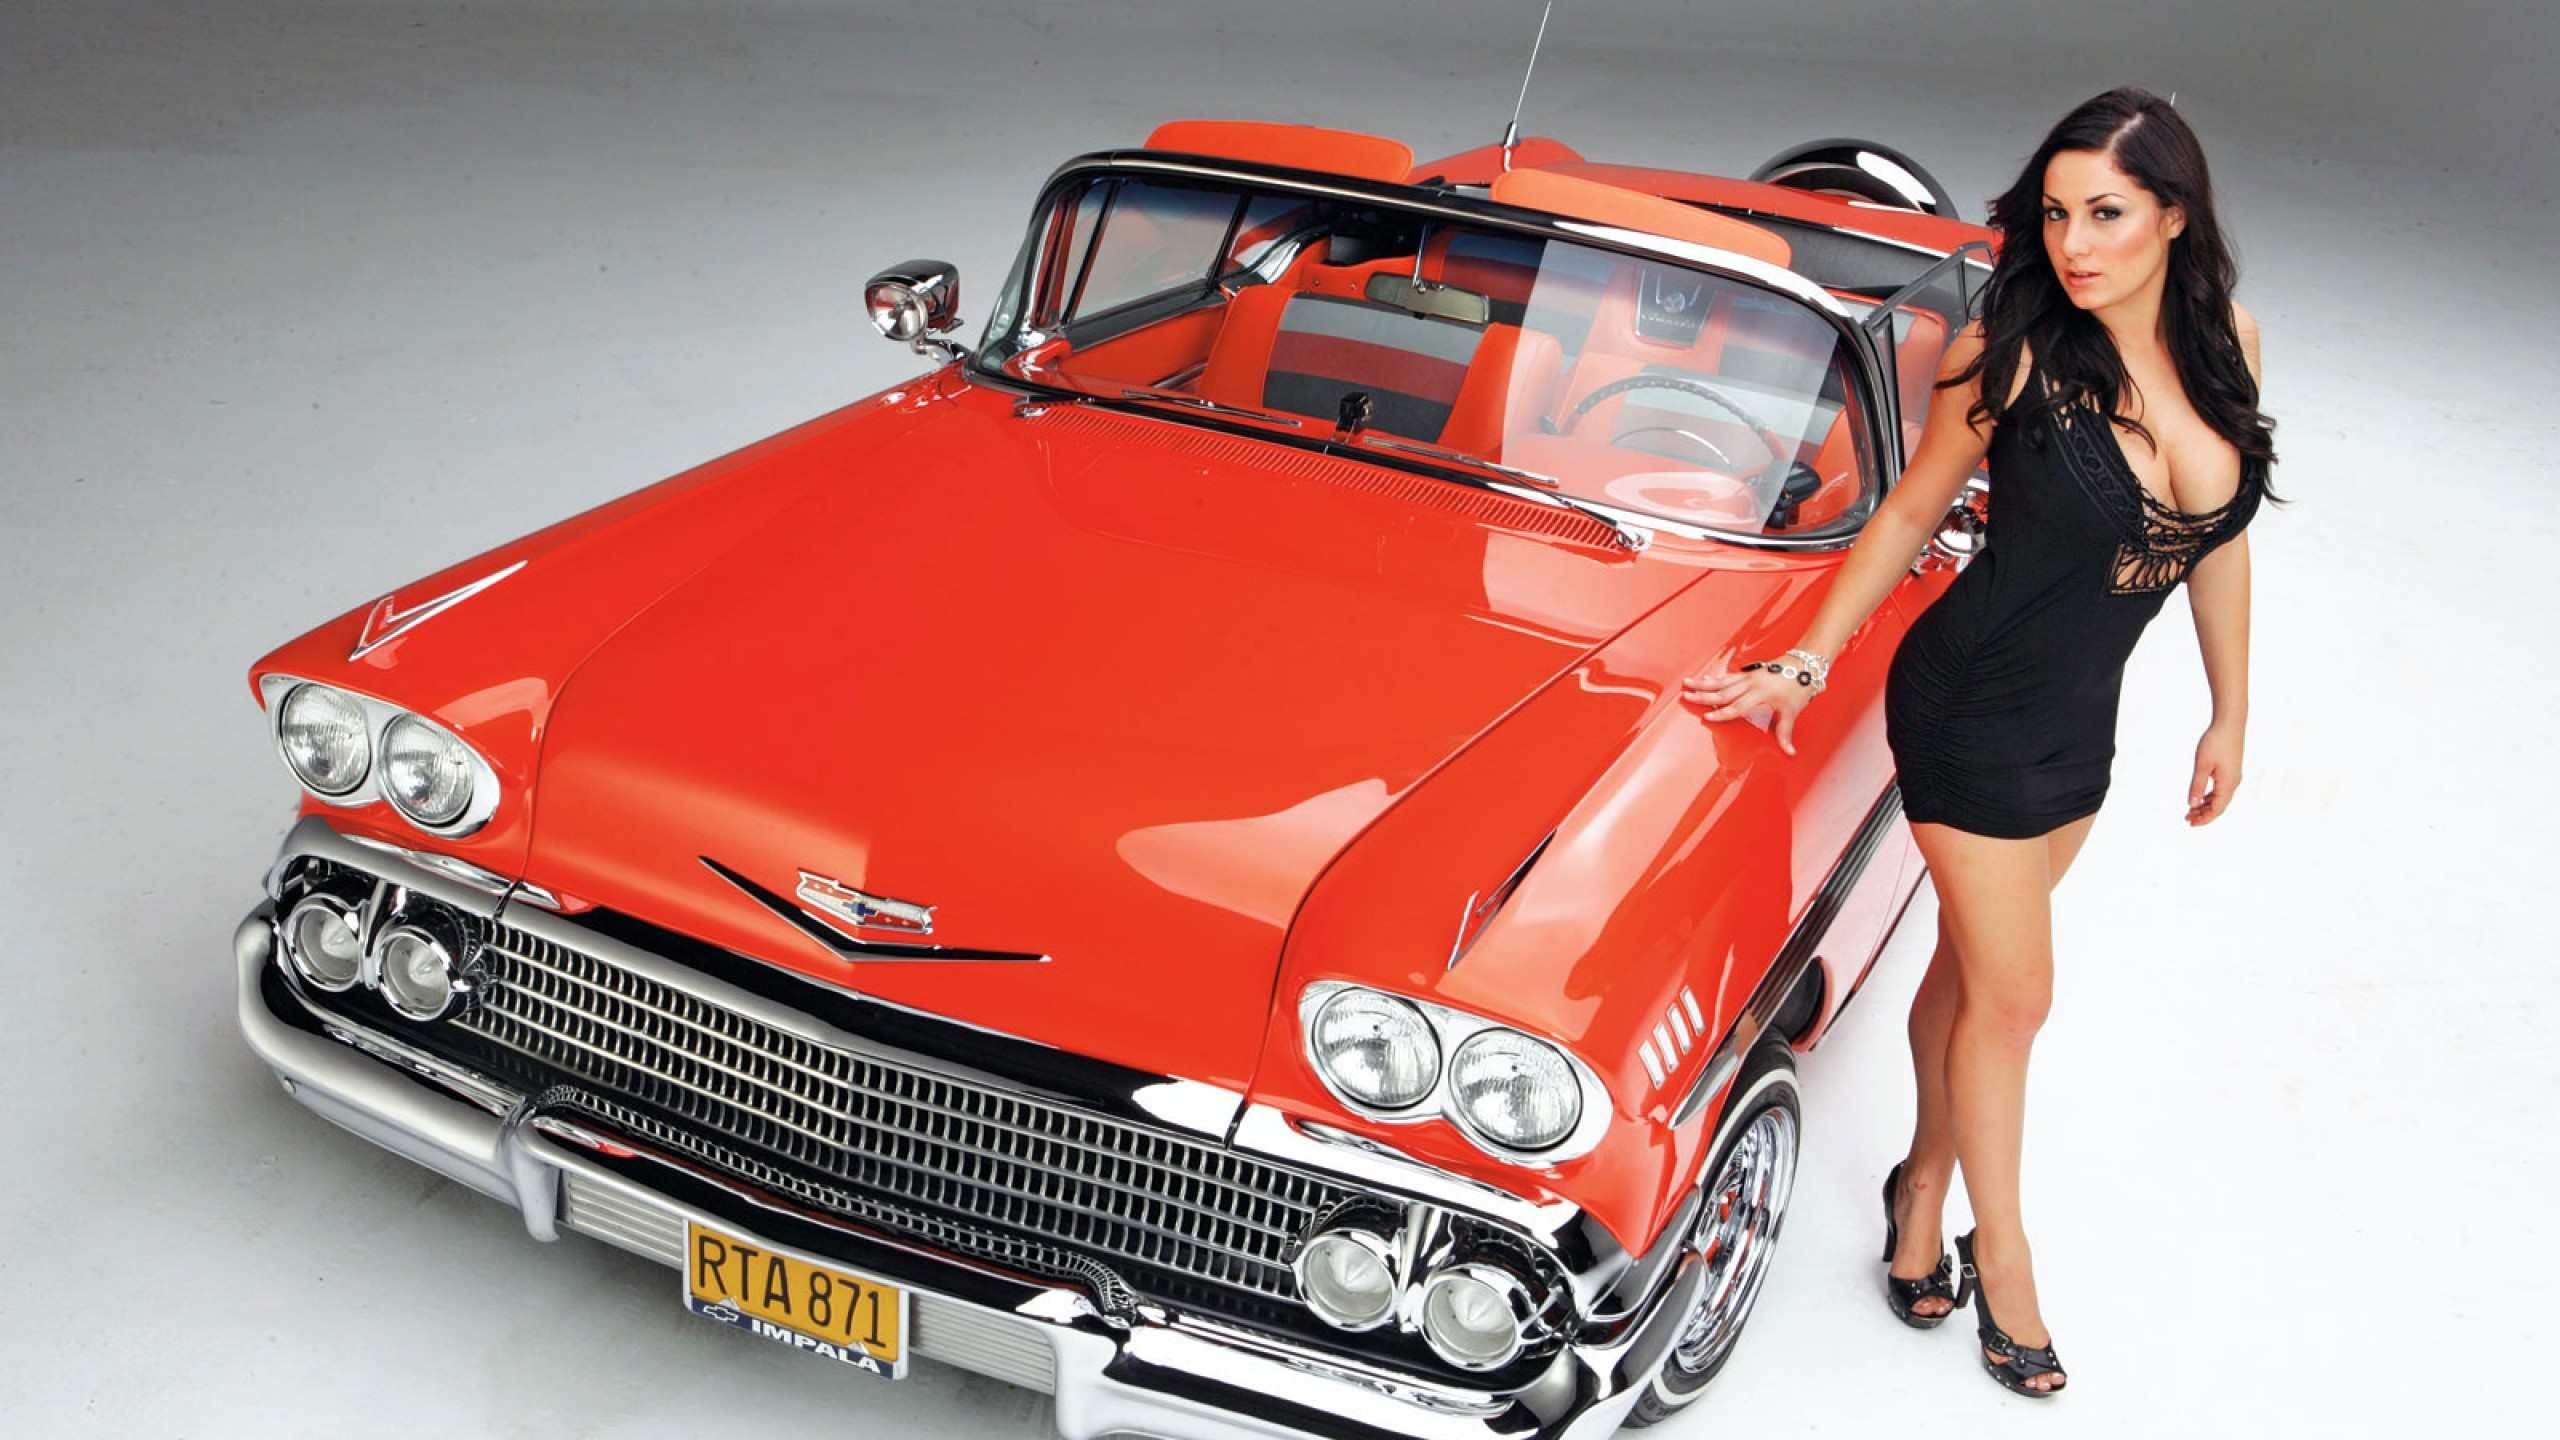 People 2560x1440 car pinup models high angle Chevrolet classic car old car red cars Chevrolet Bel Air women with cars vehicle boobs cleavage simple background gray background oldtimers dress dark hair looking at viewer heels black heels women American cars